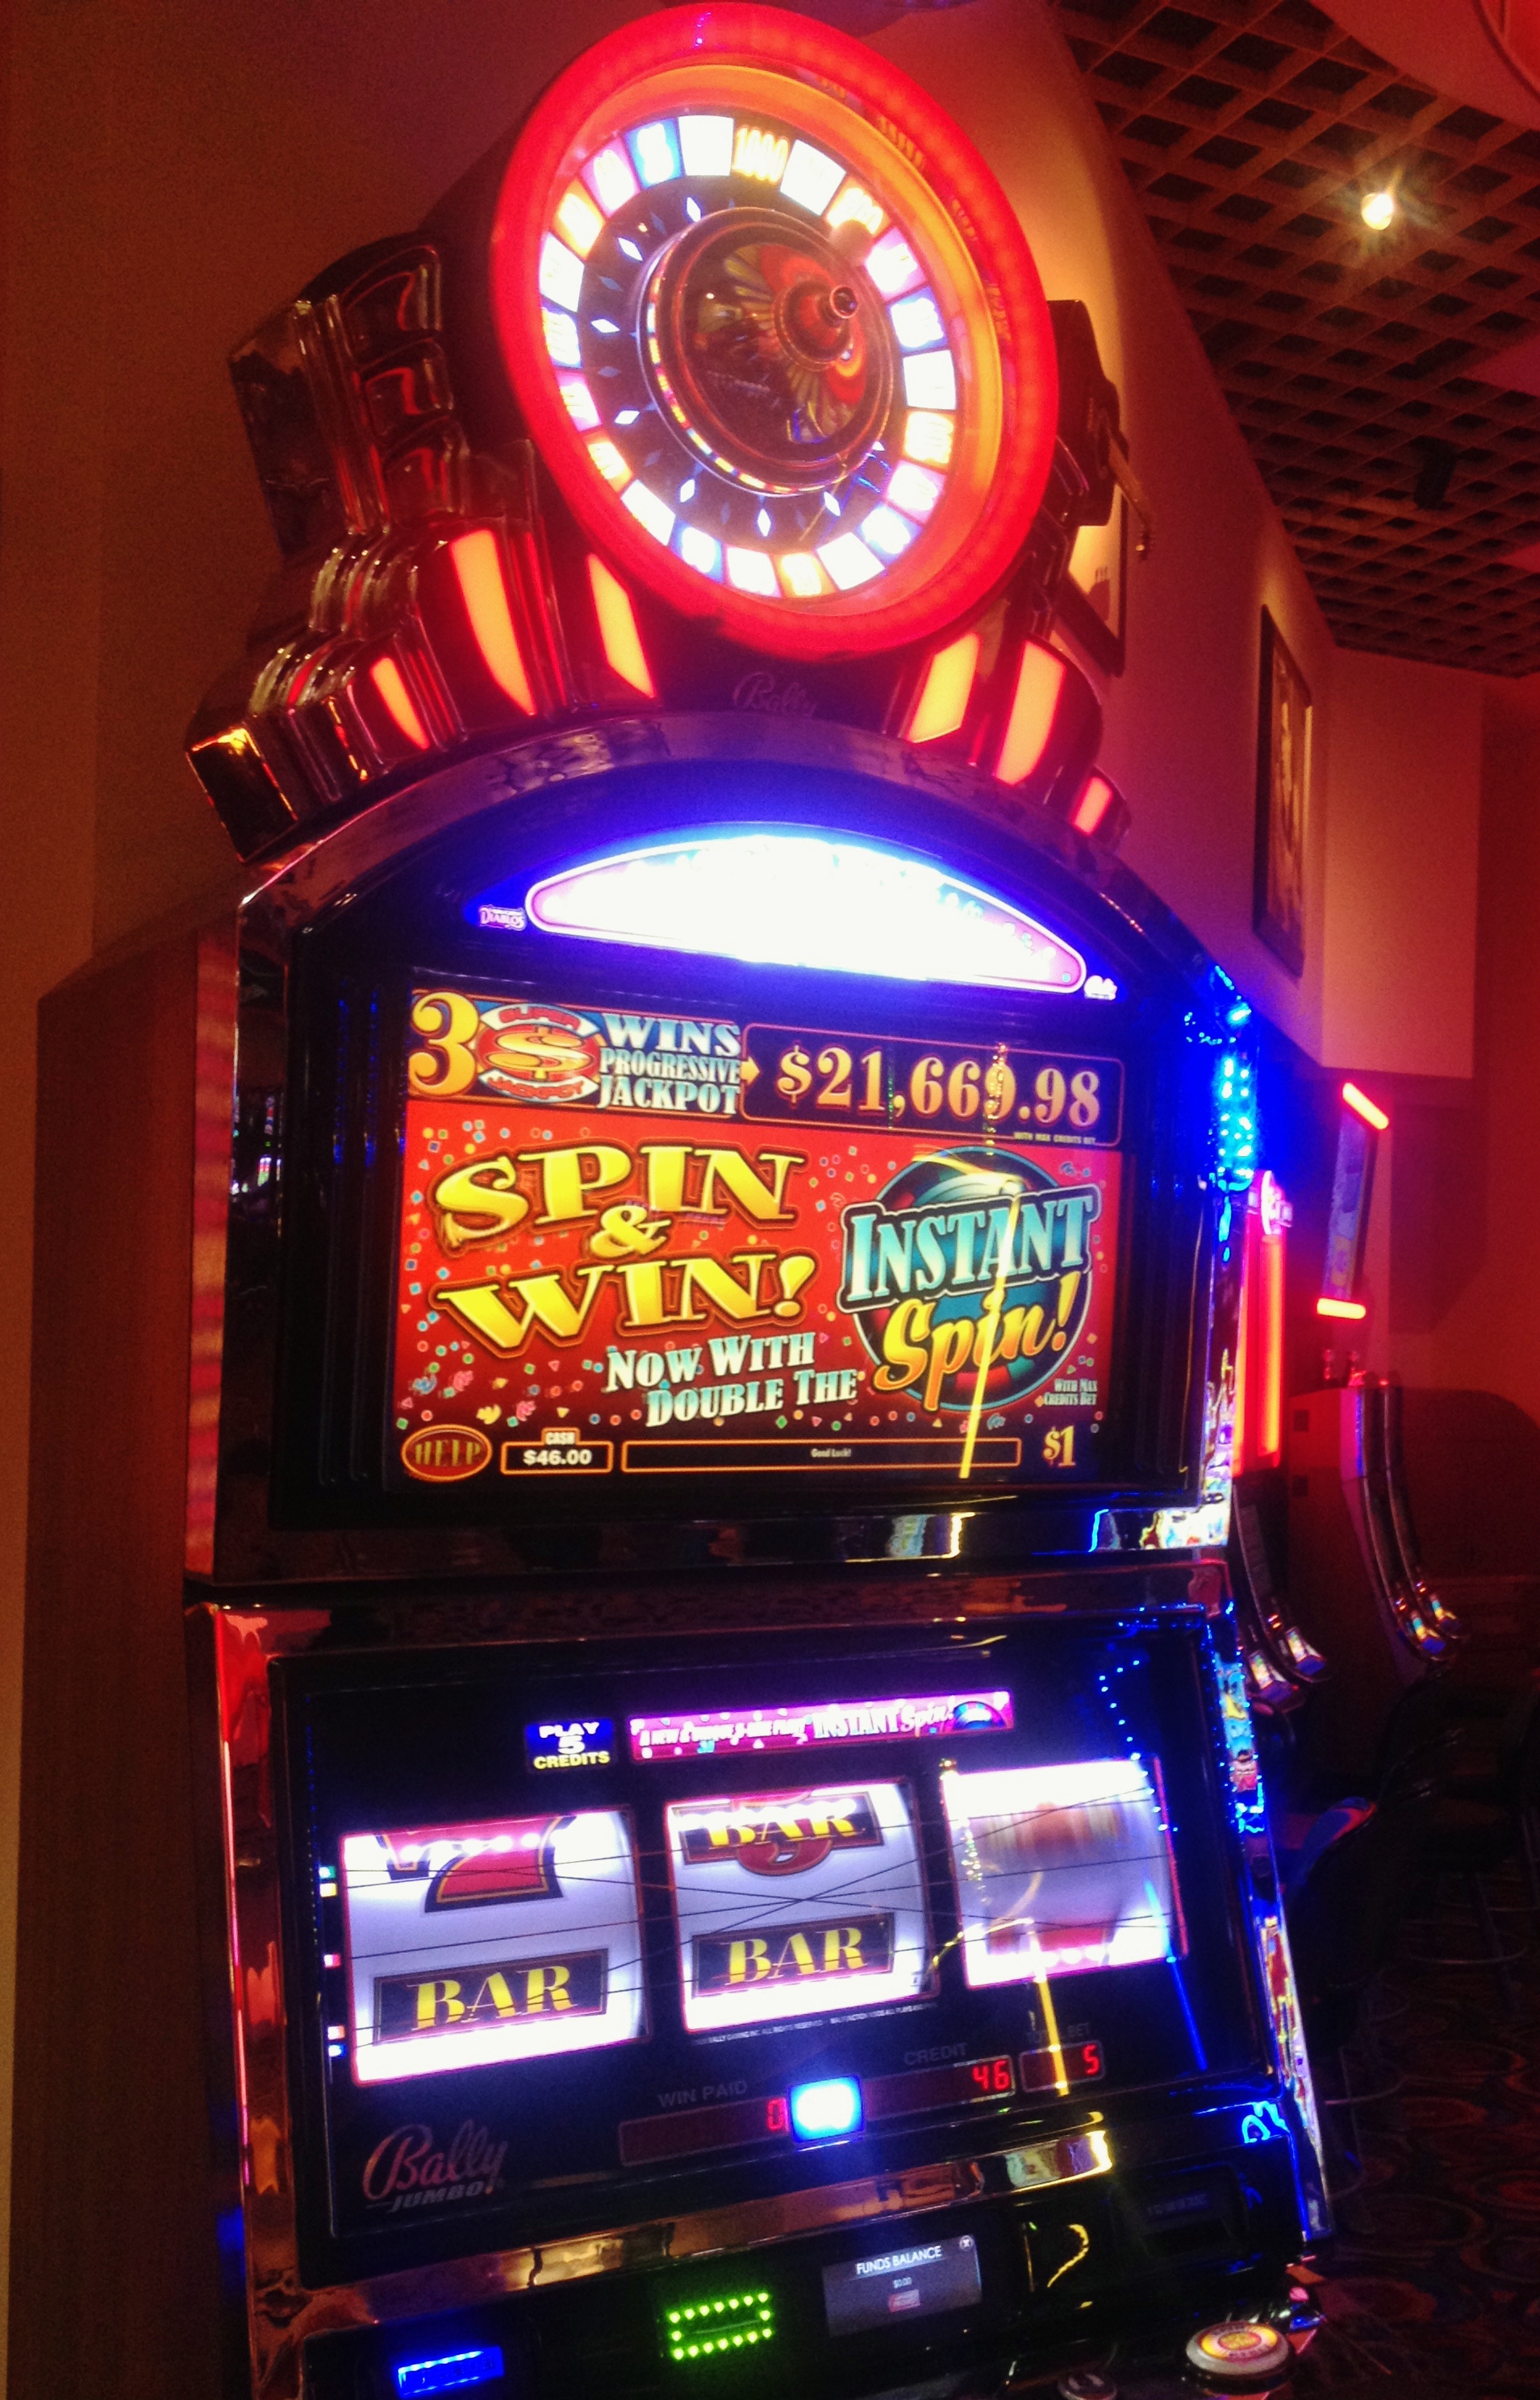 Best slot machines to play at hard rock tampa 2019 Alles First classic slots galaxy